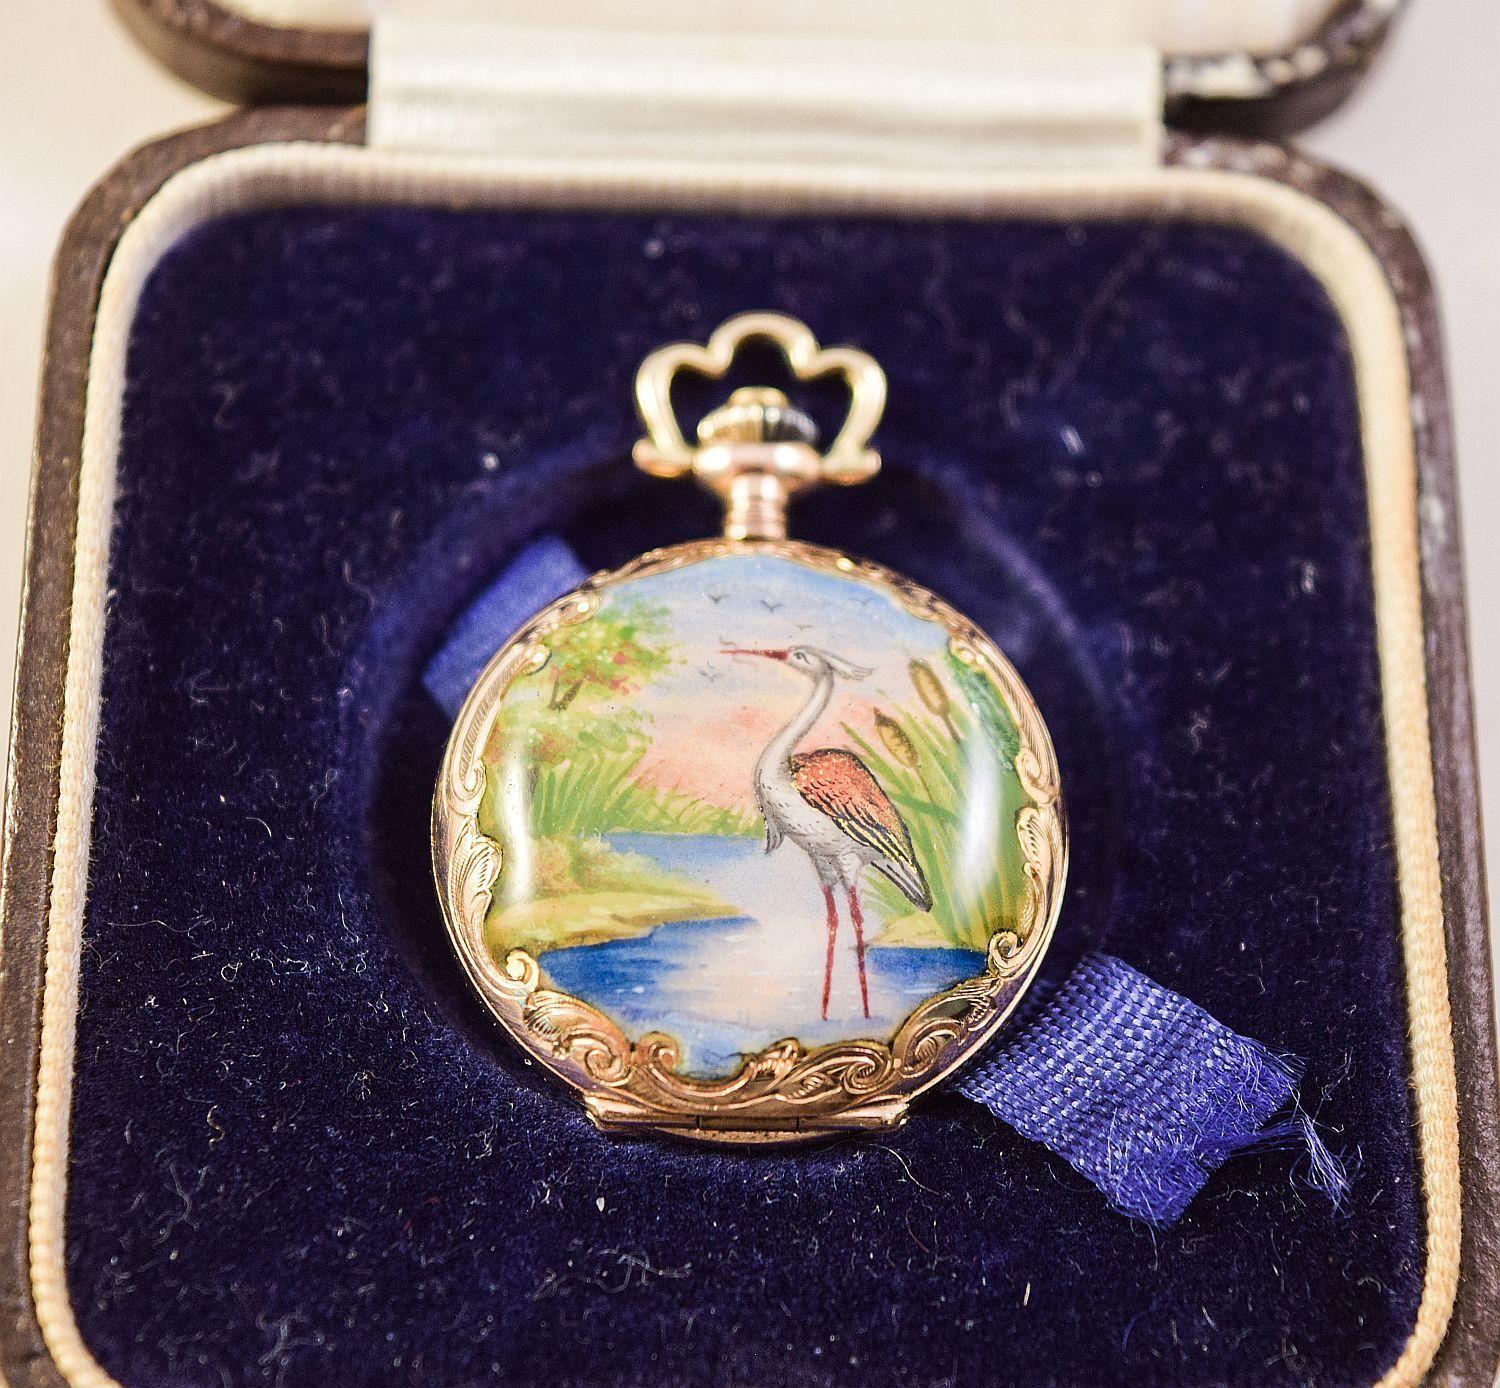 Enamel Pocket Watch Hunter case tropical landscapes and Heron amazing condition 15